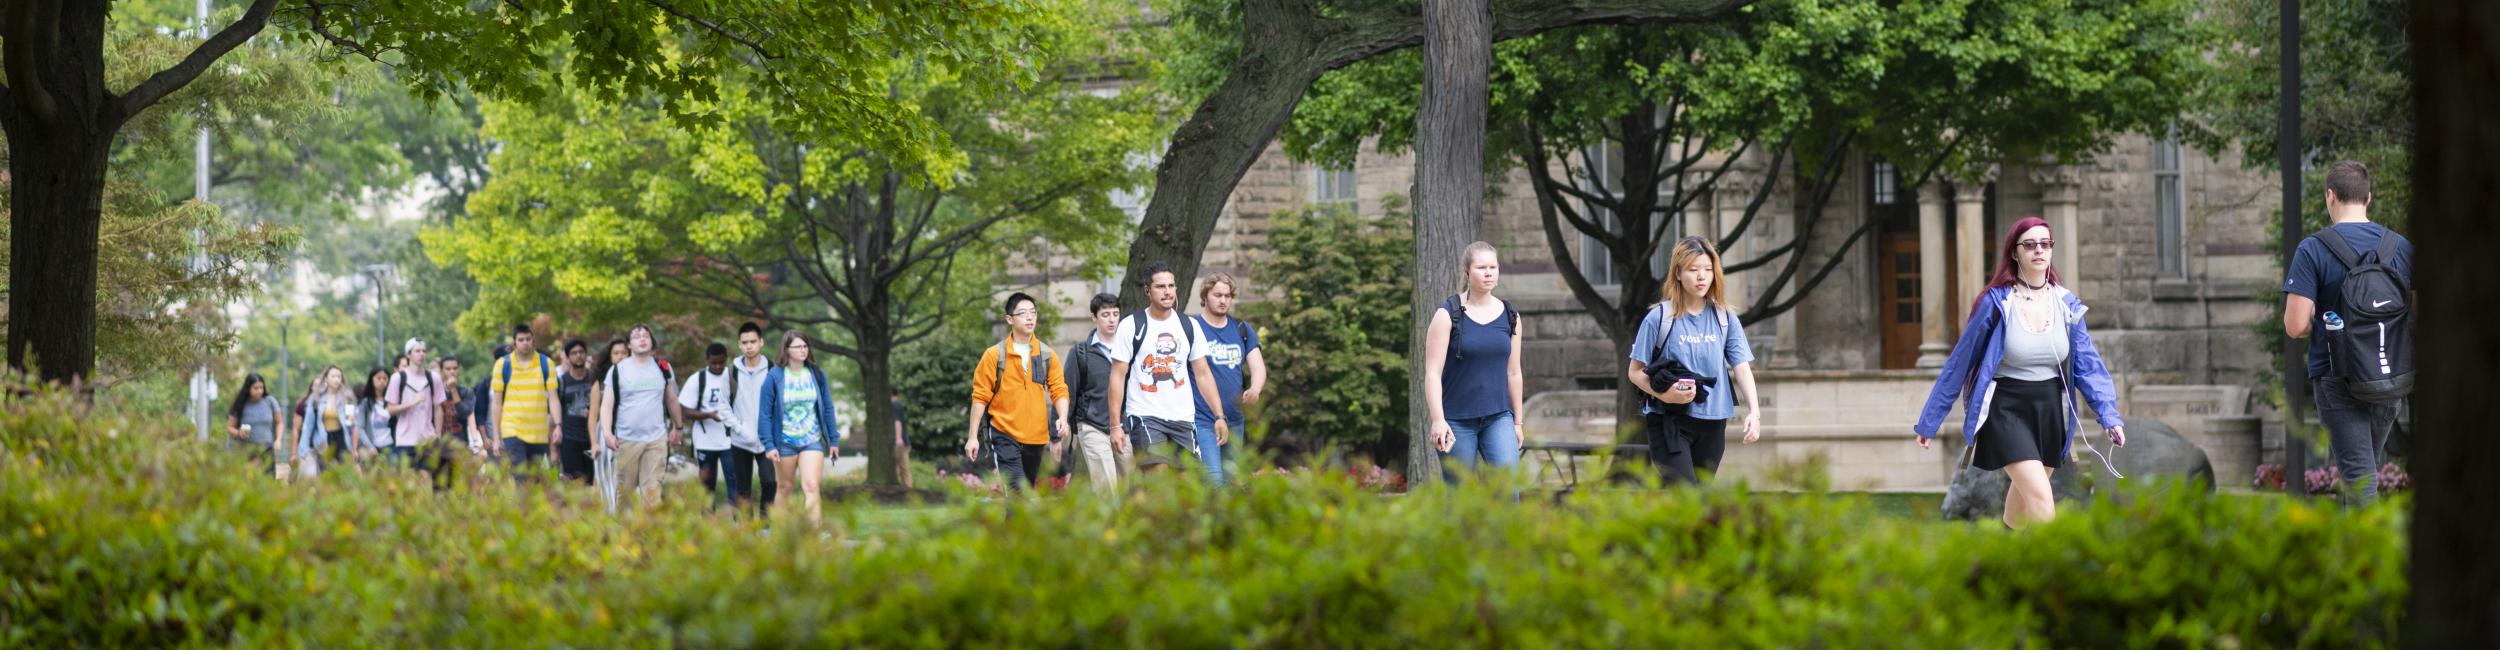 students walking on campus for spring or summer visit